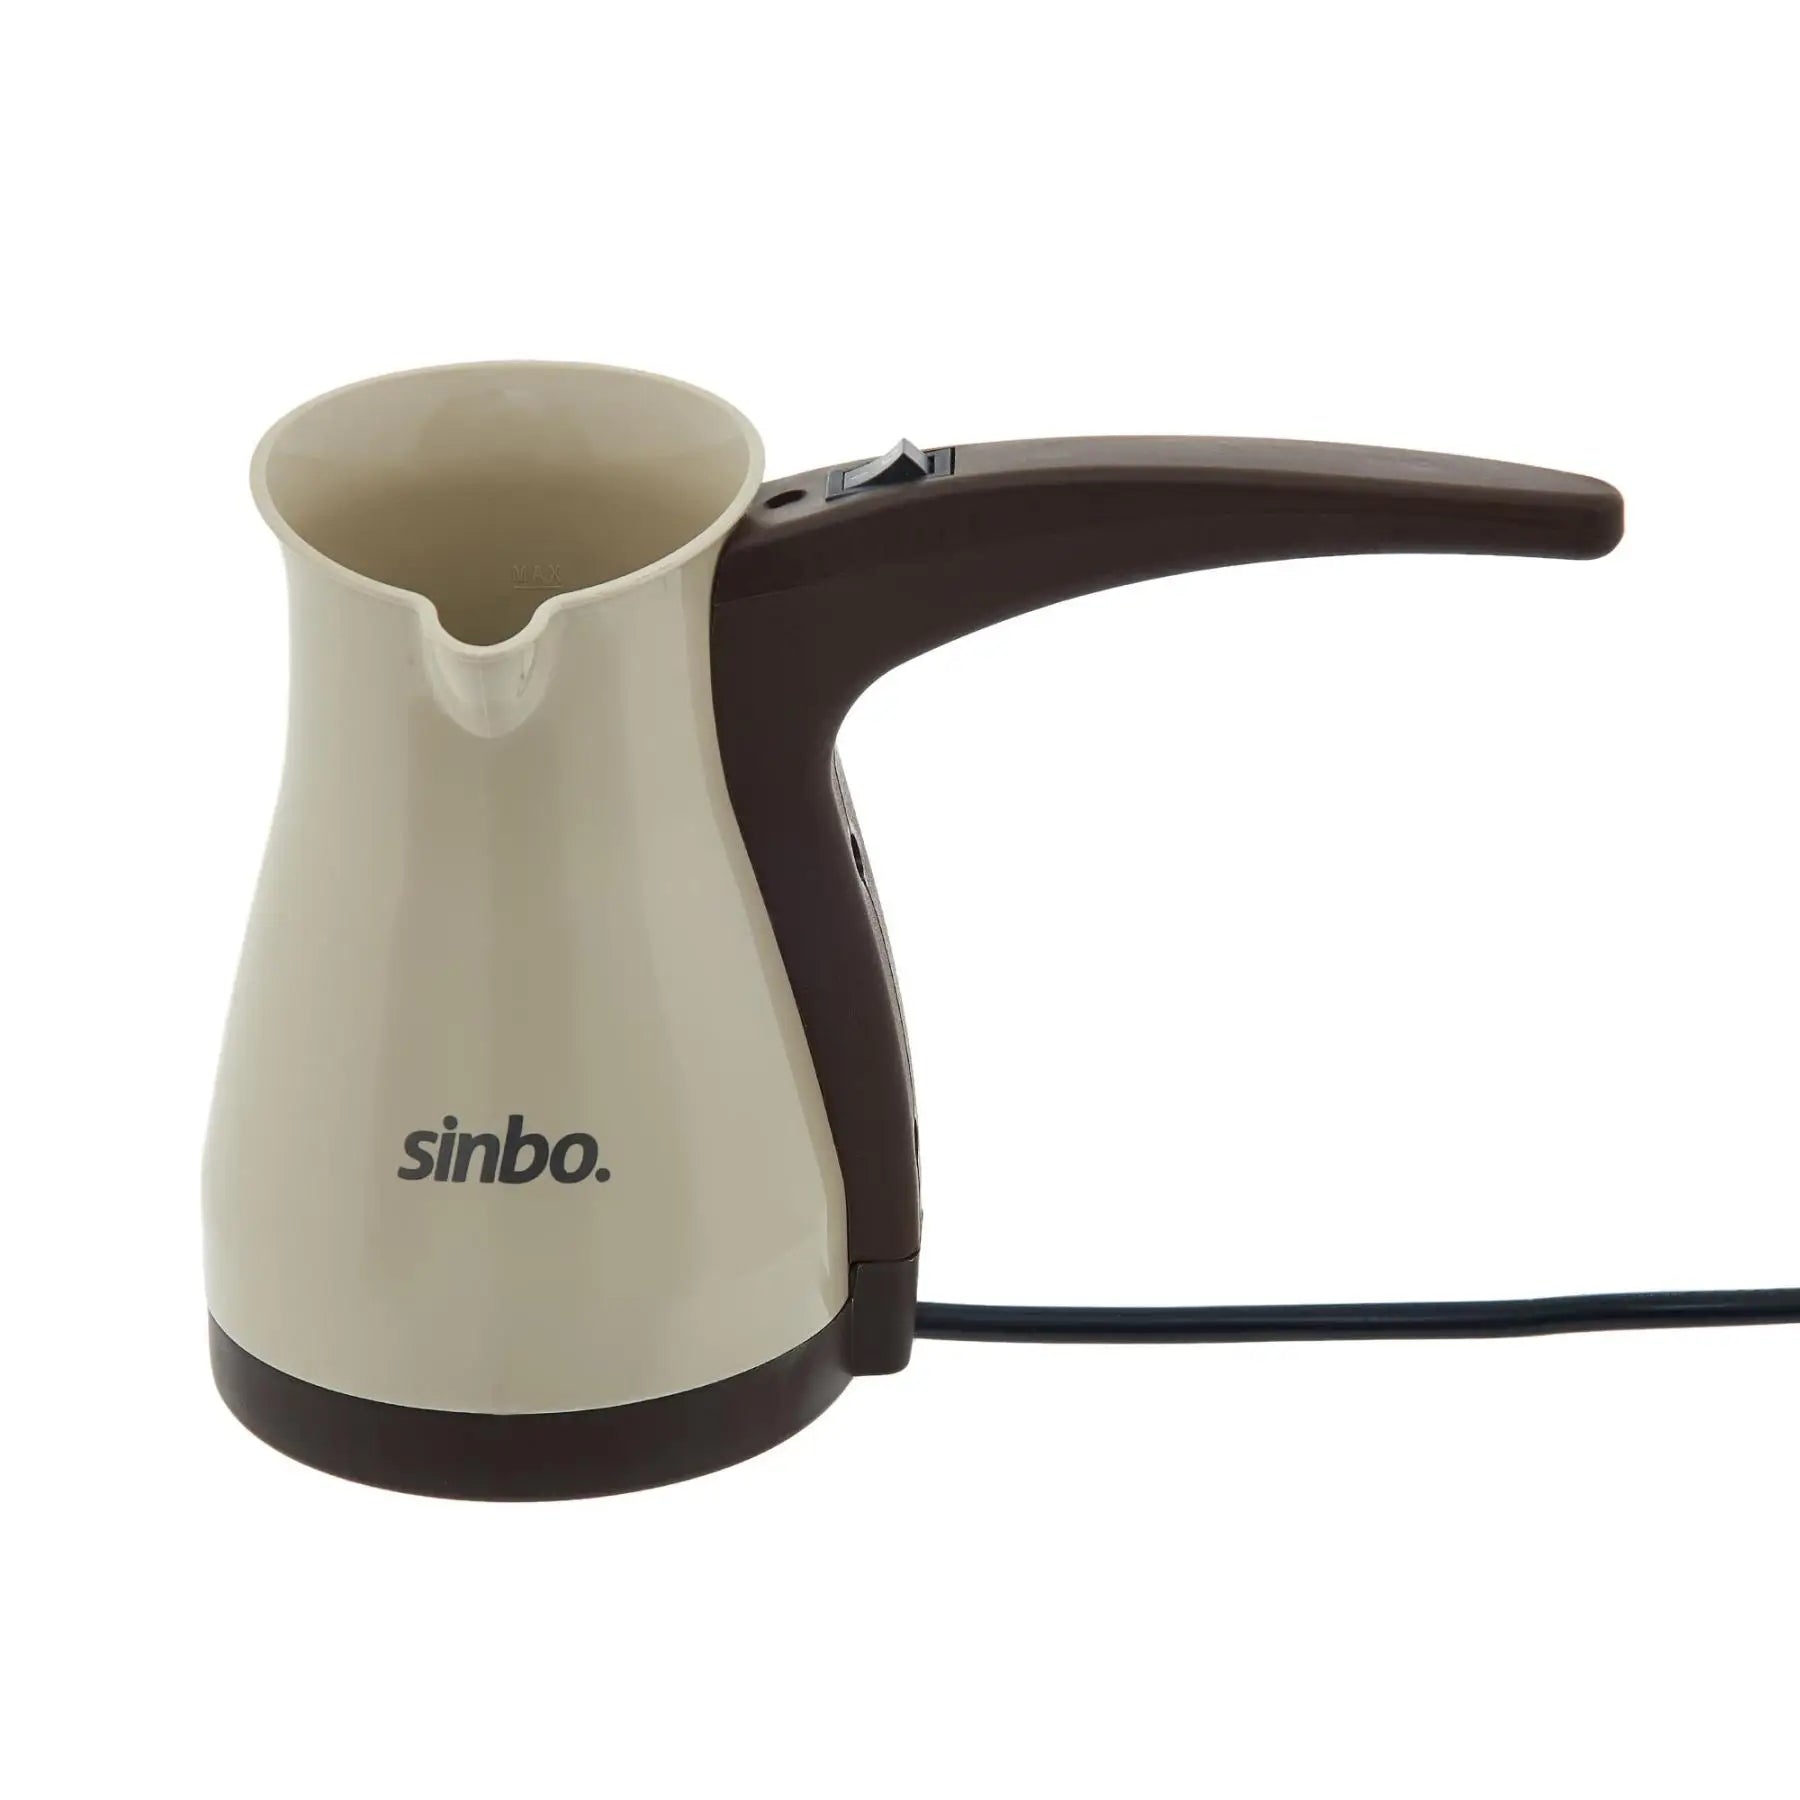 Sinbo Portable Electrical Turkish Coffee Pot Espresso Electric Maker Machine Boiled Milk Kettle Office Home